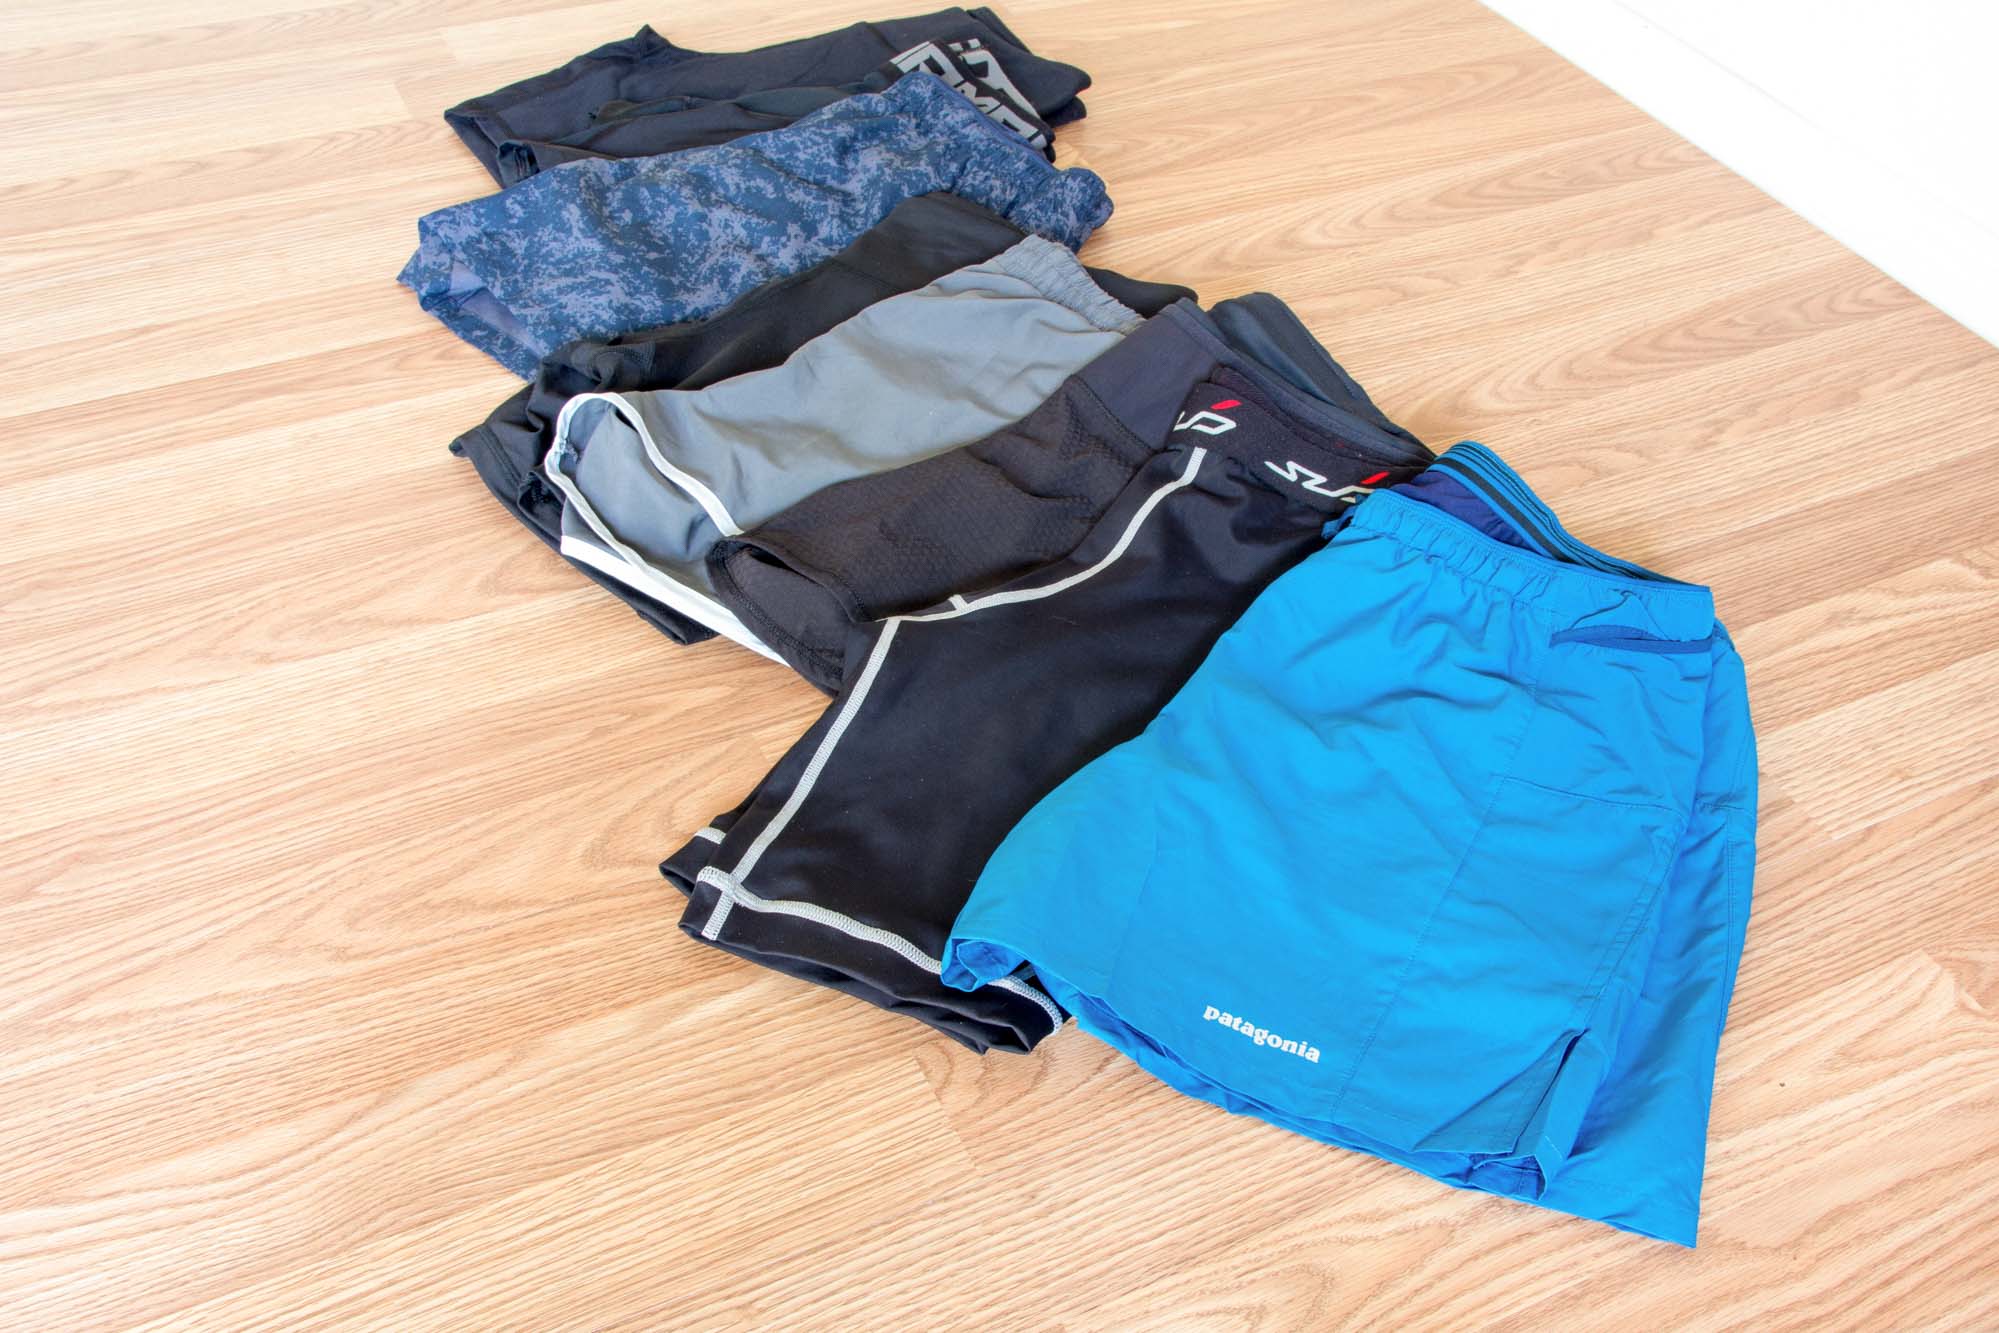 10 Best Compression Shorts for Runners (2020)